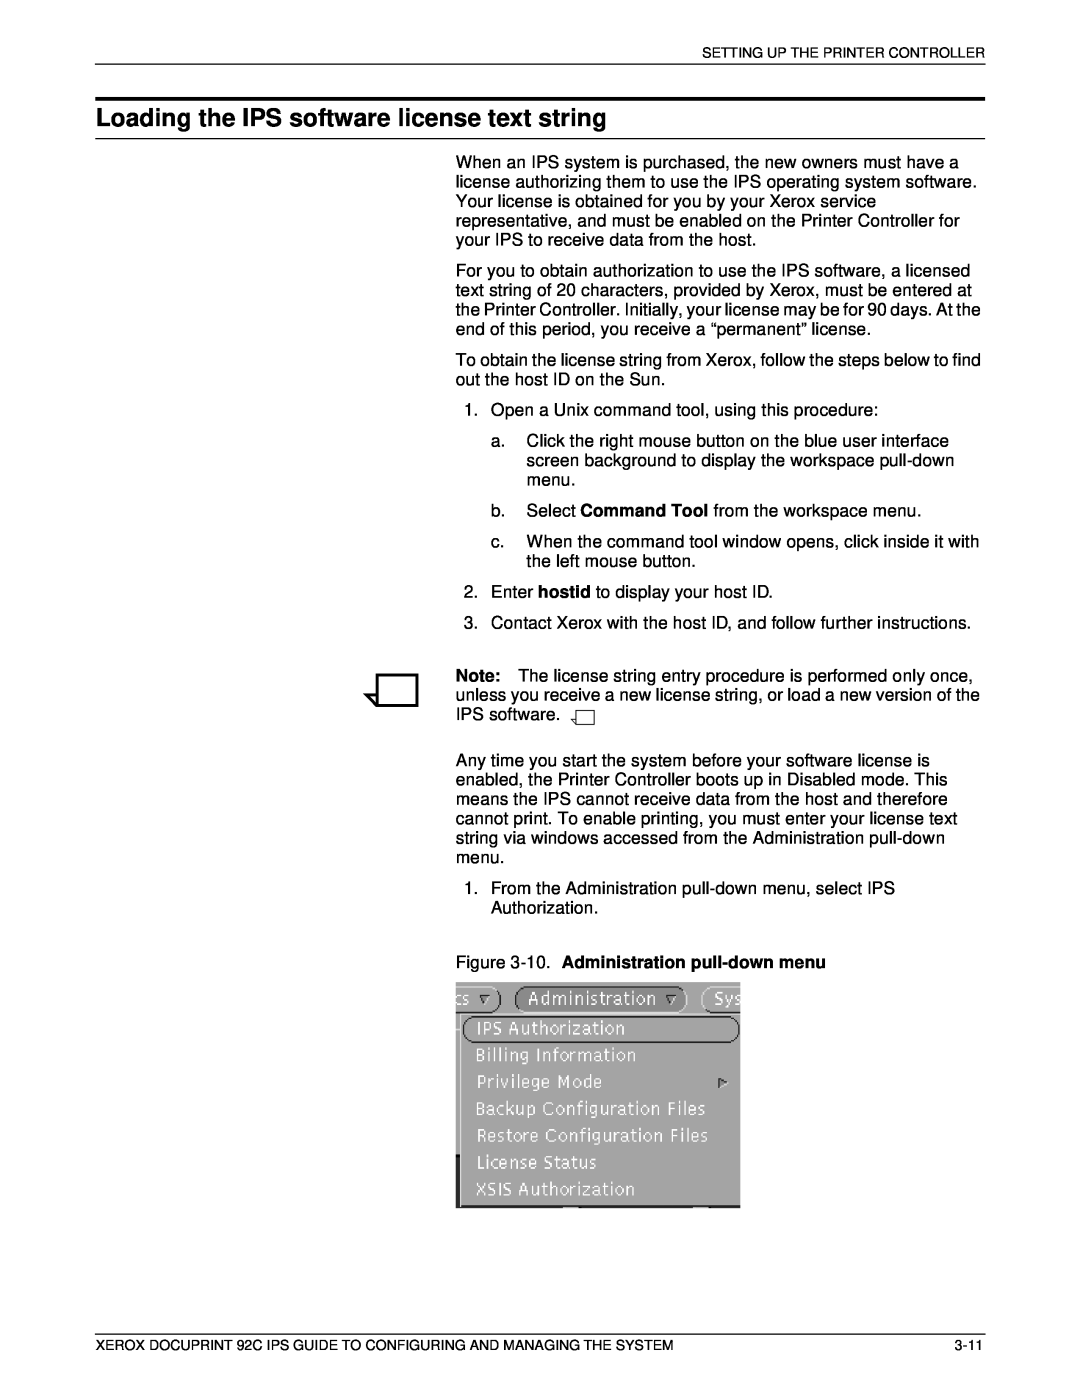 Xerox 92C IPS manual Loading the IPS software license text string, 10. Administration pull-down menu 